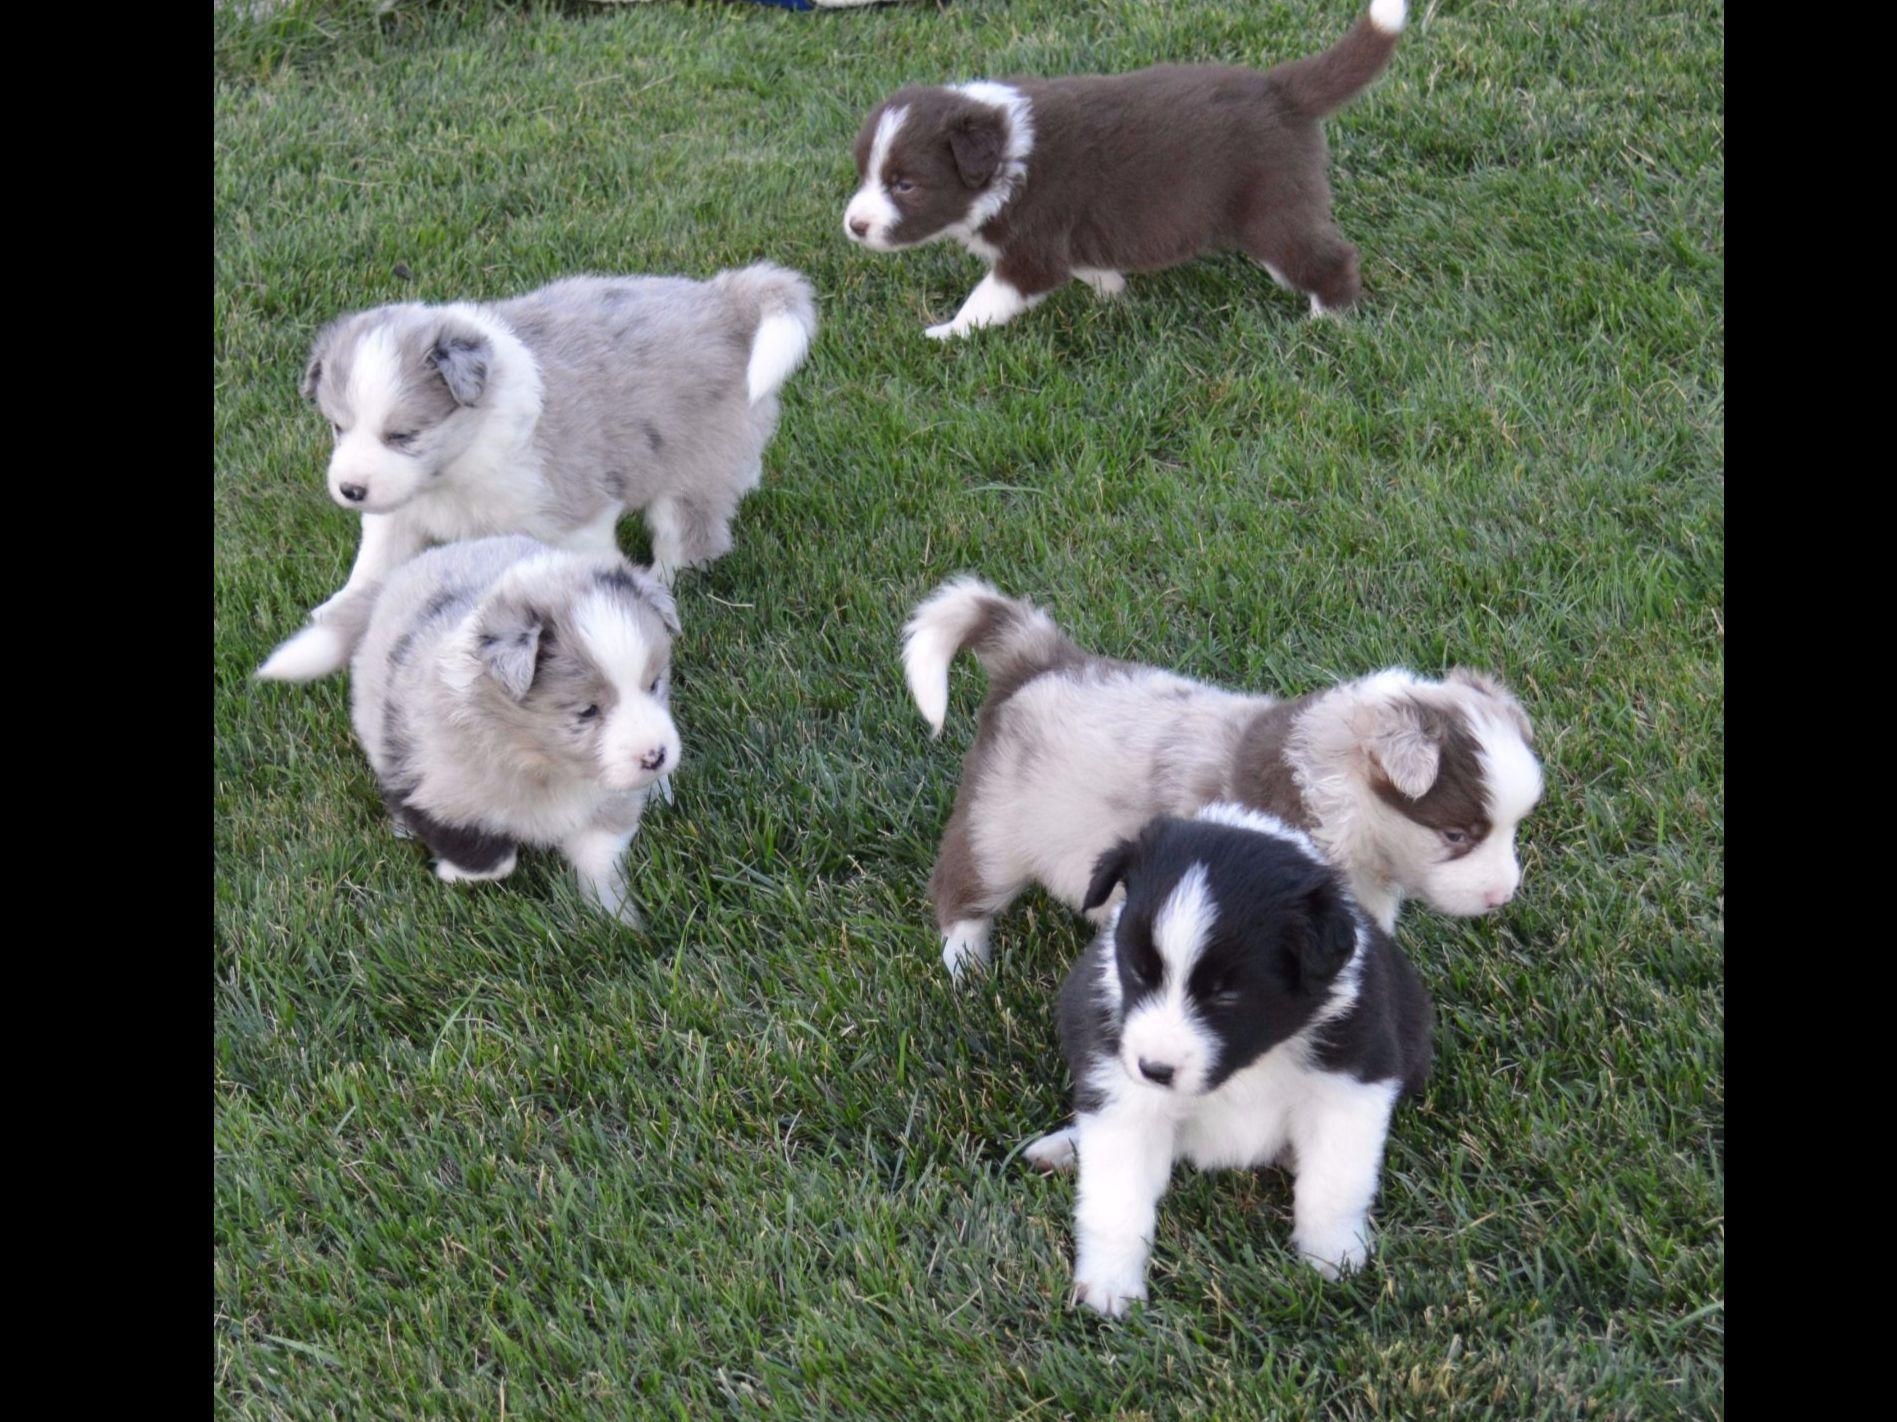 All purebred puppies are from AKC Registered Litters